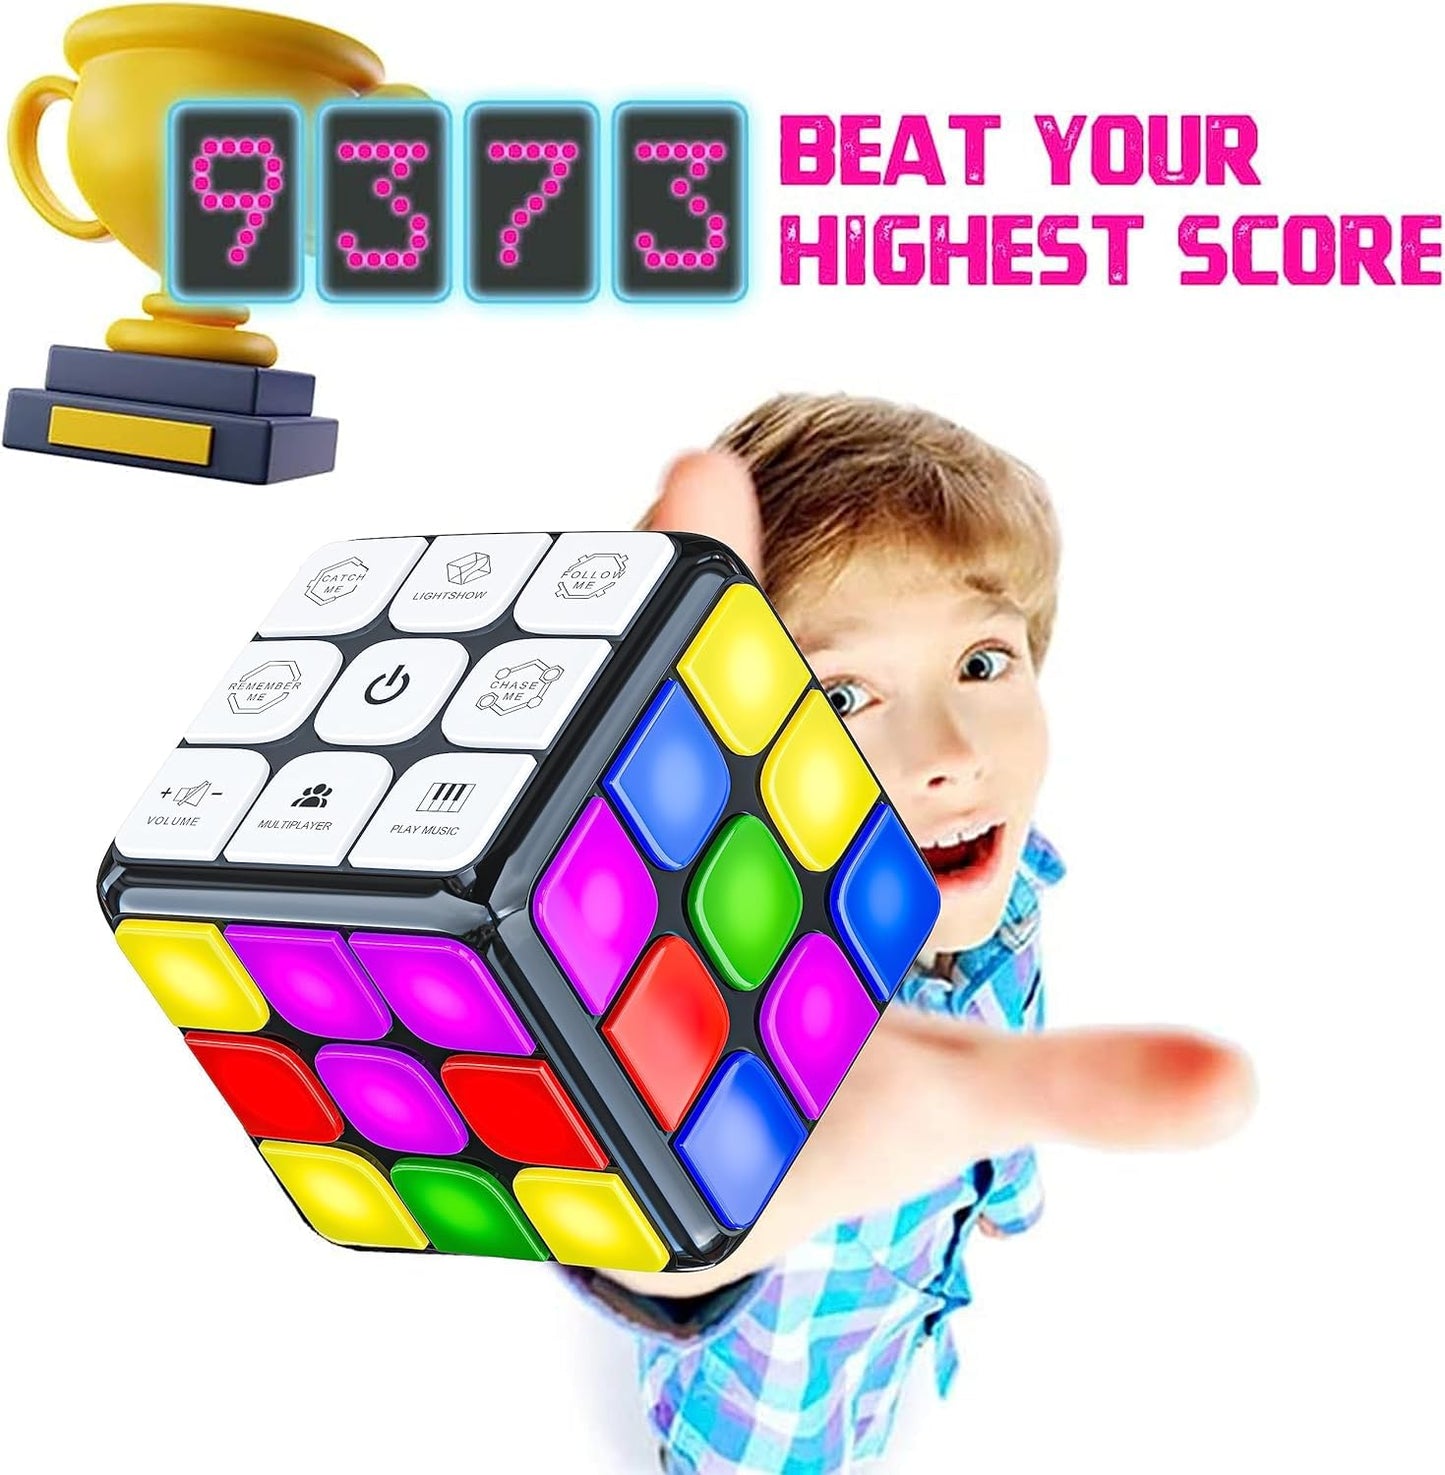 Skywin Puzzle Cube Game - Flashing Cube Handheld Electronic Games Stem Toy - Fun Memory Games & Brain Games for Adults and Kids - amzGamess